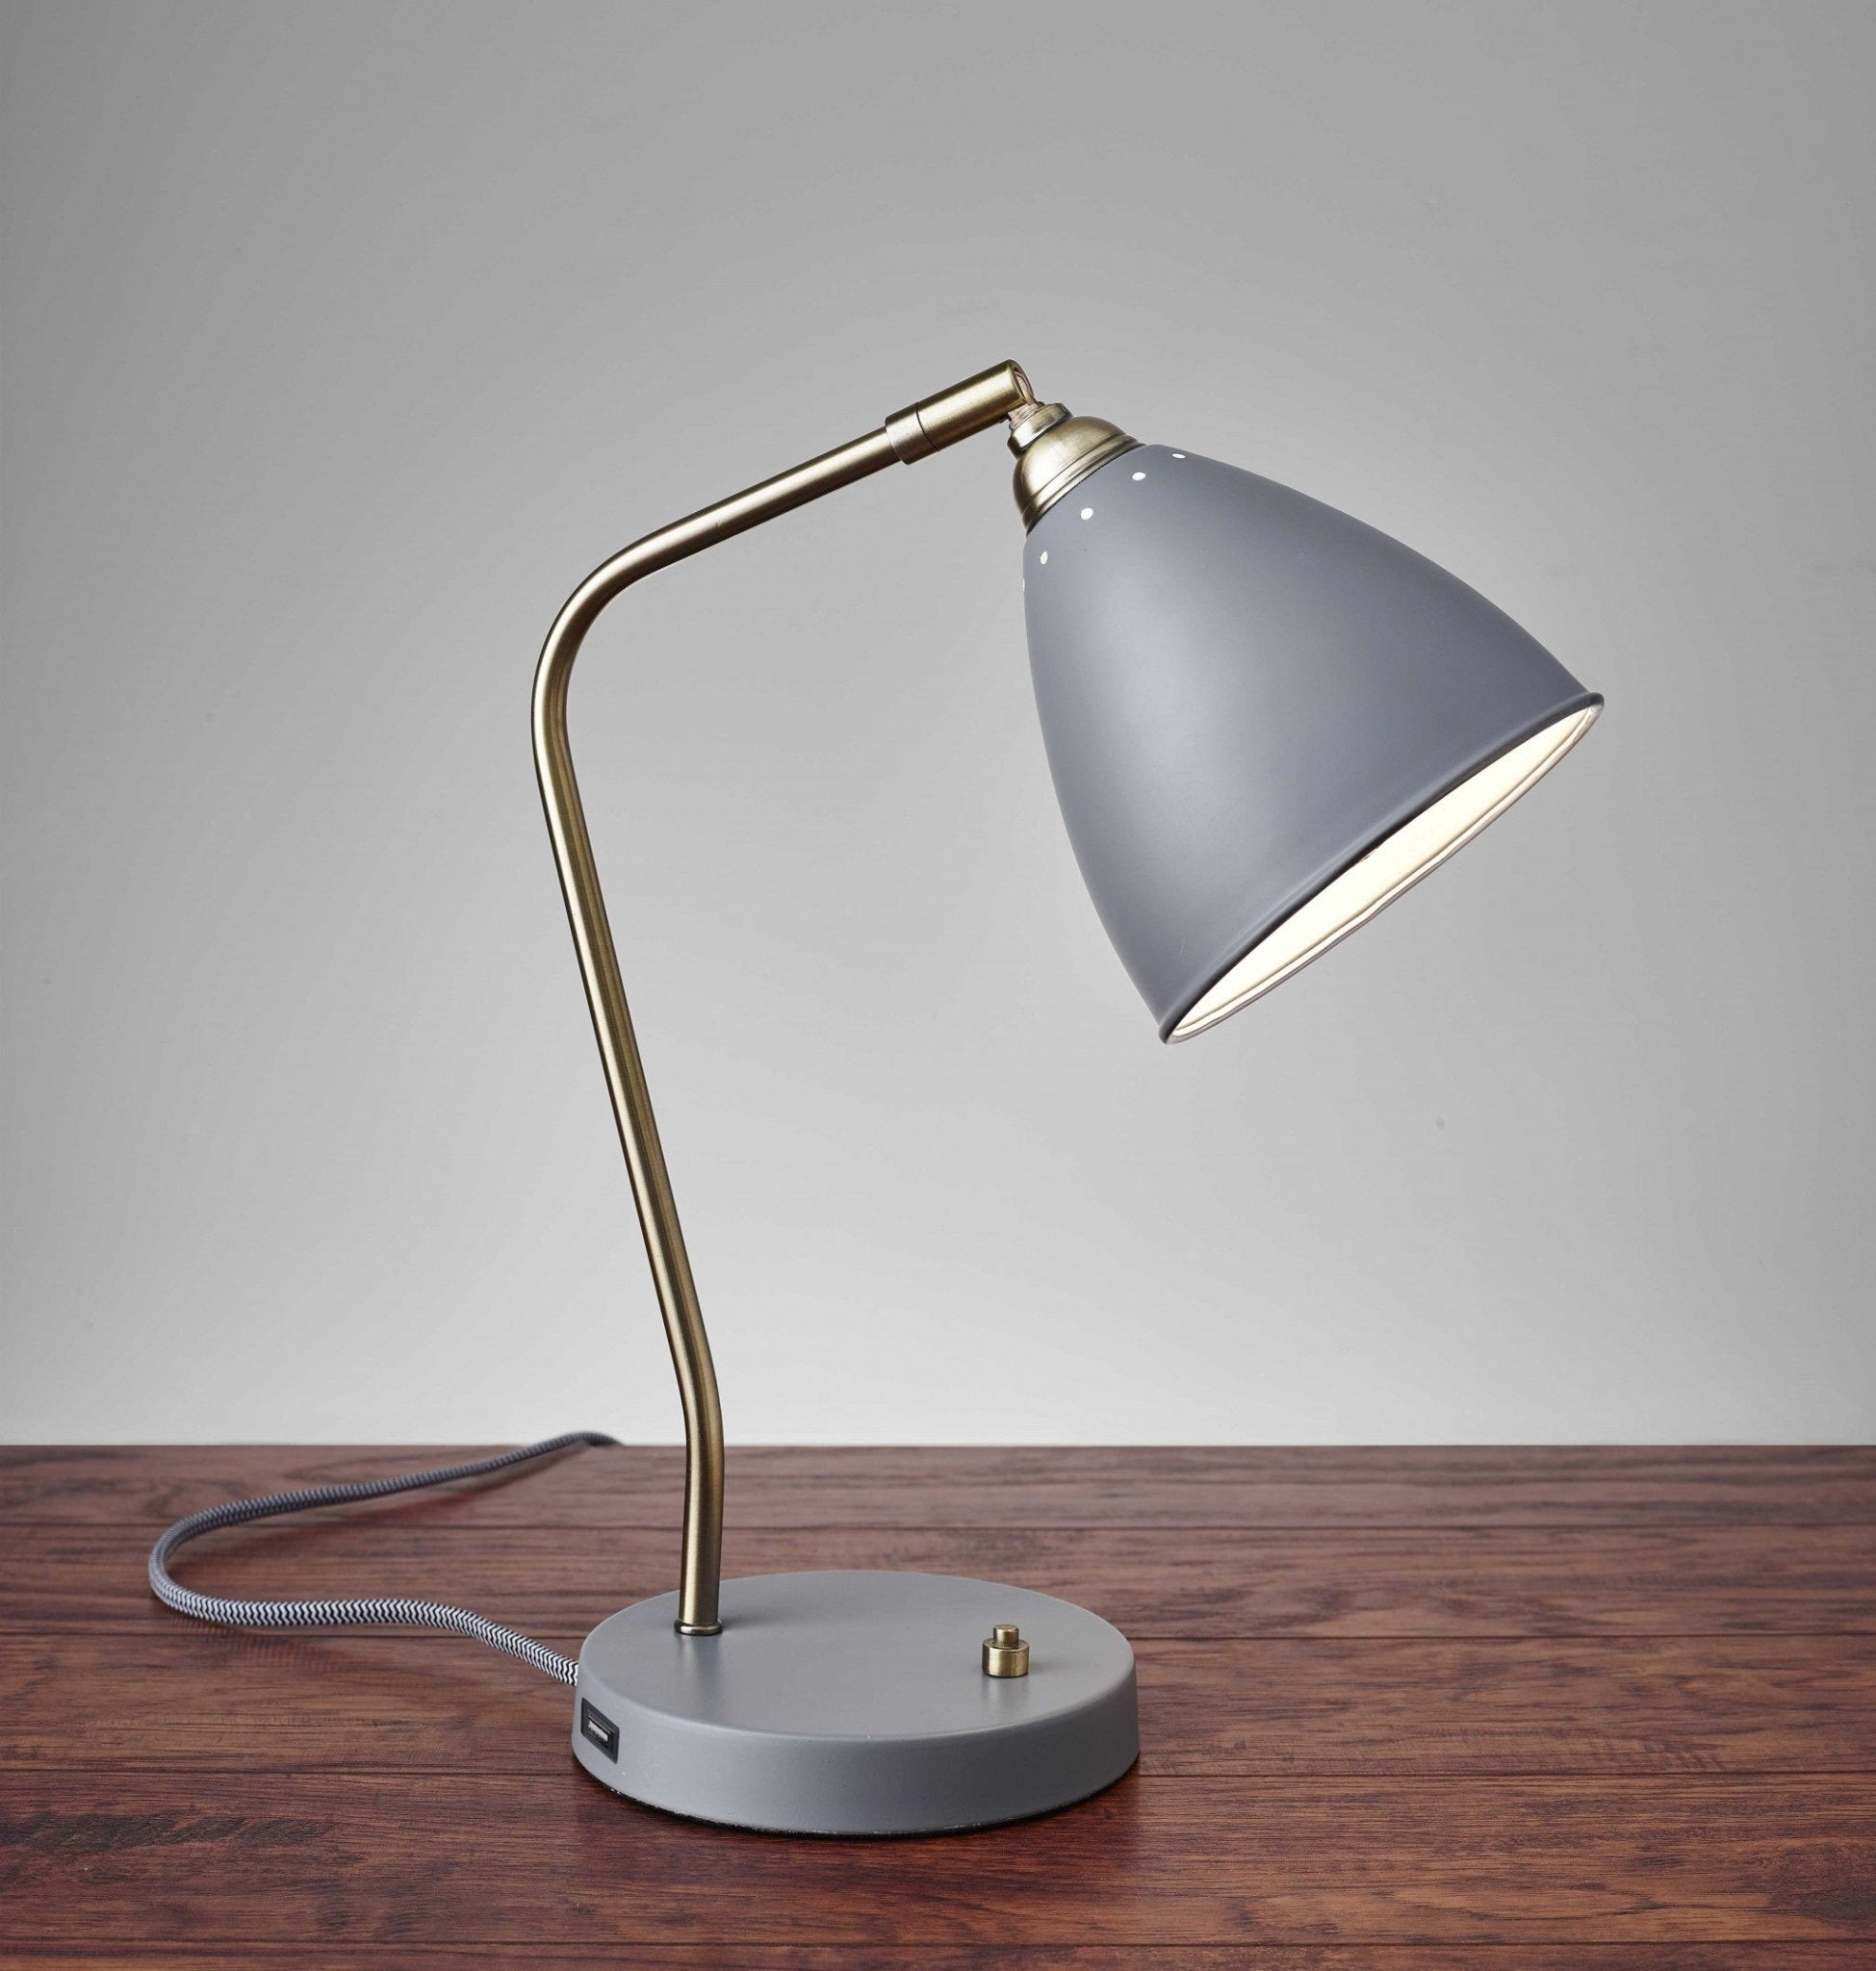 Grey Metal And Antique Brass Adjustable Usb Port Desk Lamp - Tuesday Morning-Table Lamps